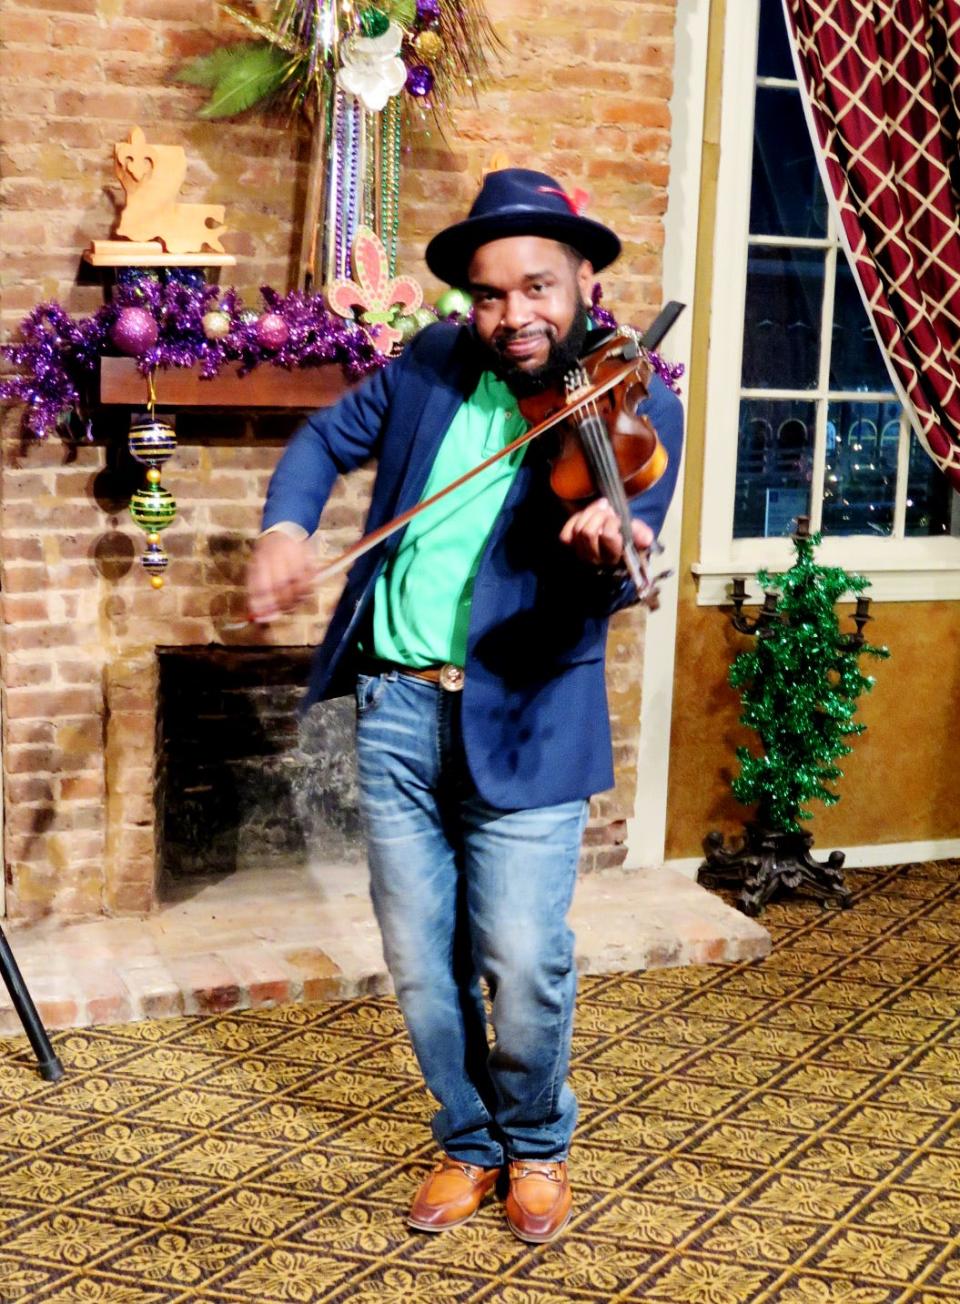 Musician "Wild" J.Y. Brown provided background music for the reception.